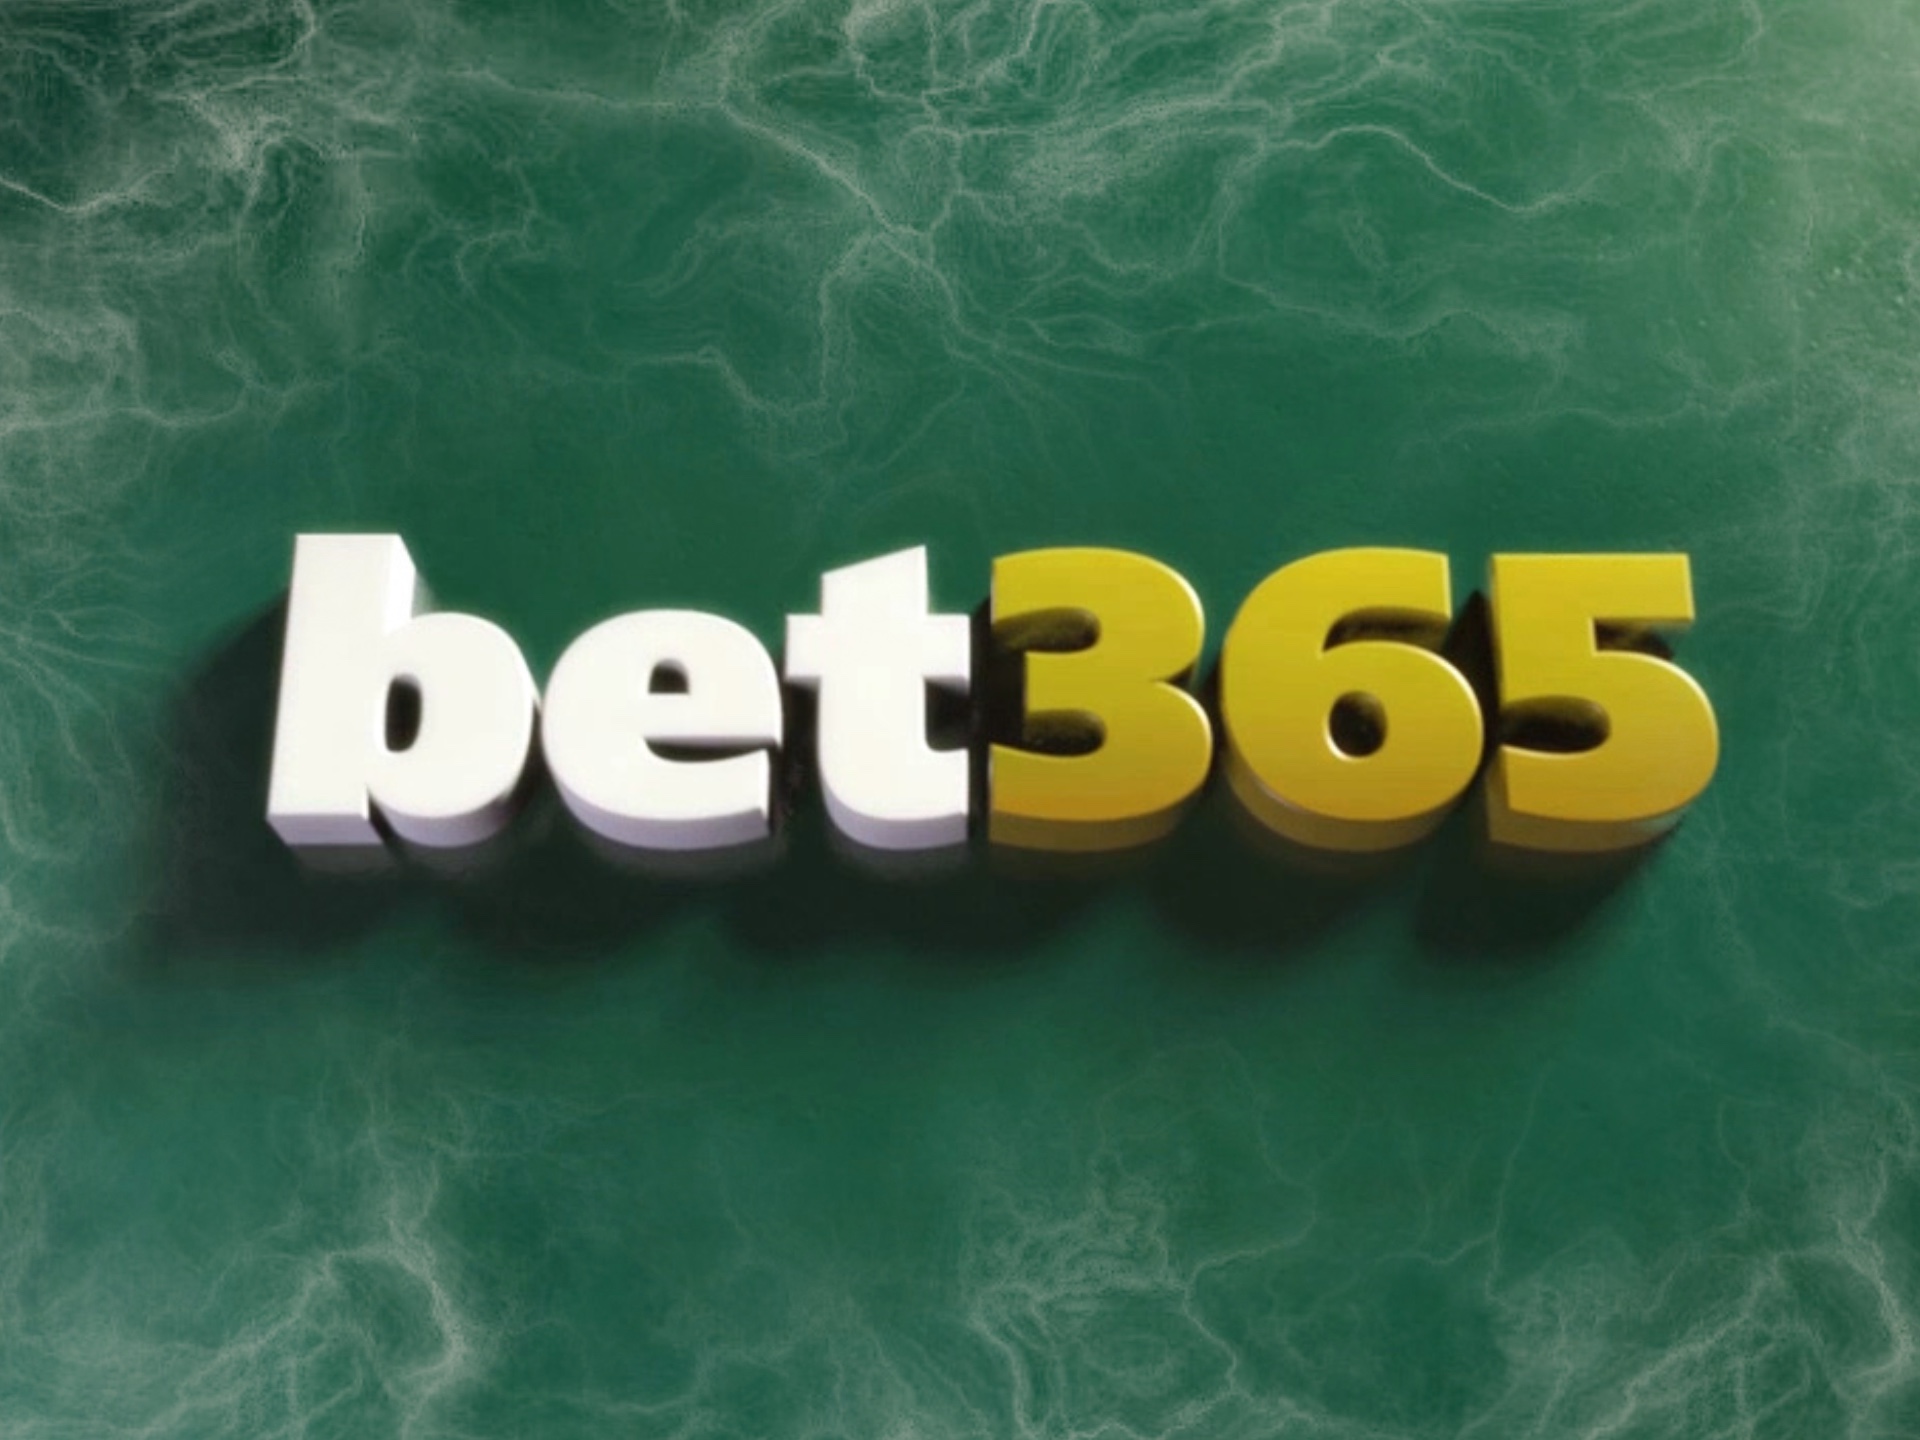 Sign up for bet365 and play casino games.